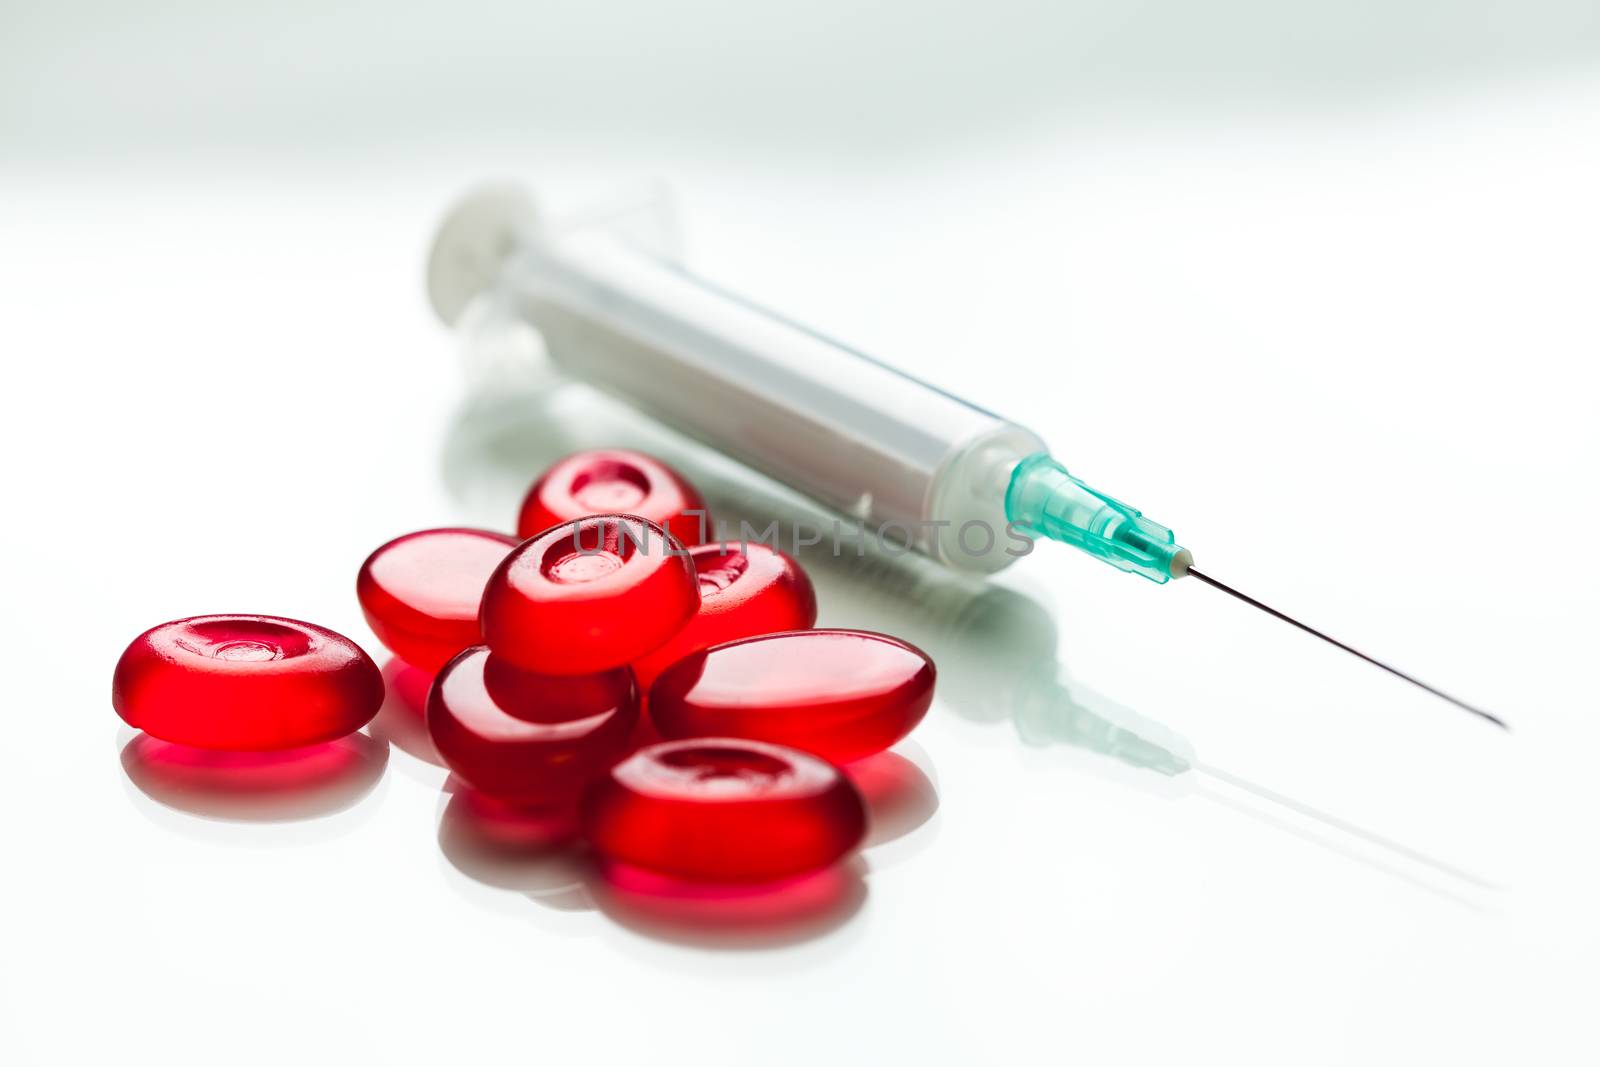 Pile of red pills & syringe with needle by Plyushkin